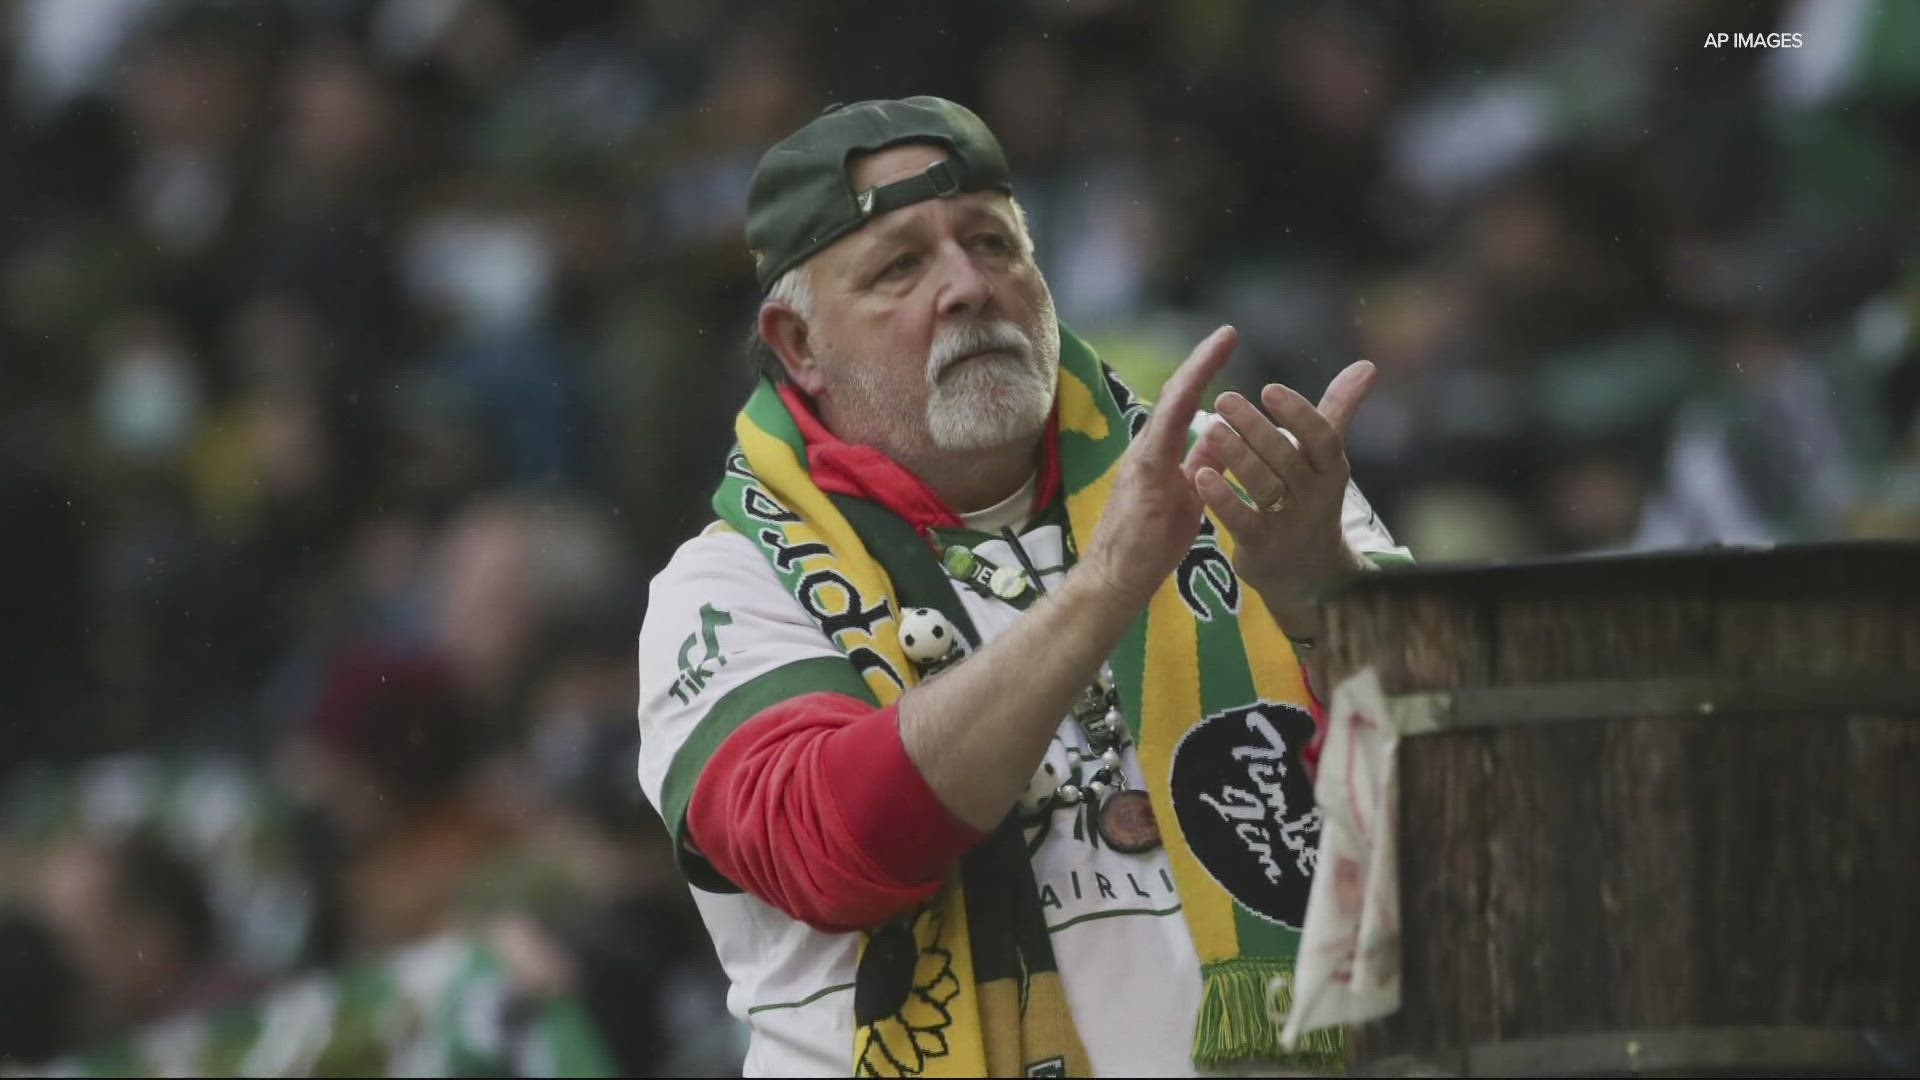 Jim Serrill, also known as Timber Jim, was the Portland Timbers mascot until 2008. On Christmas Day, his daughter Calli died from an asthma attack.